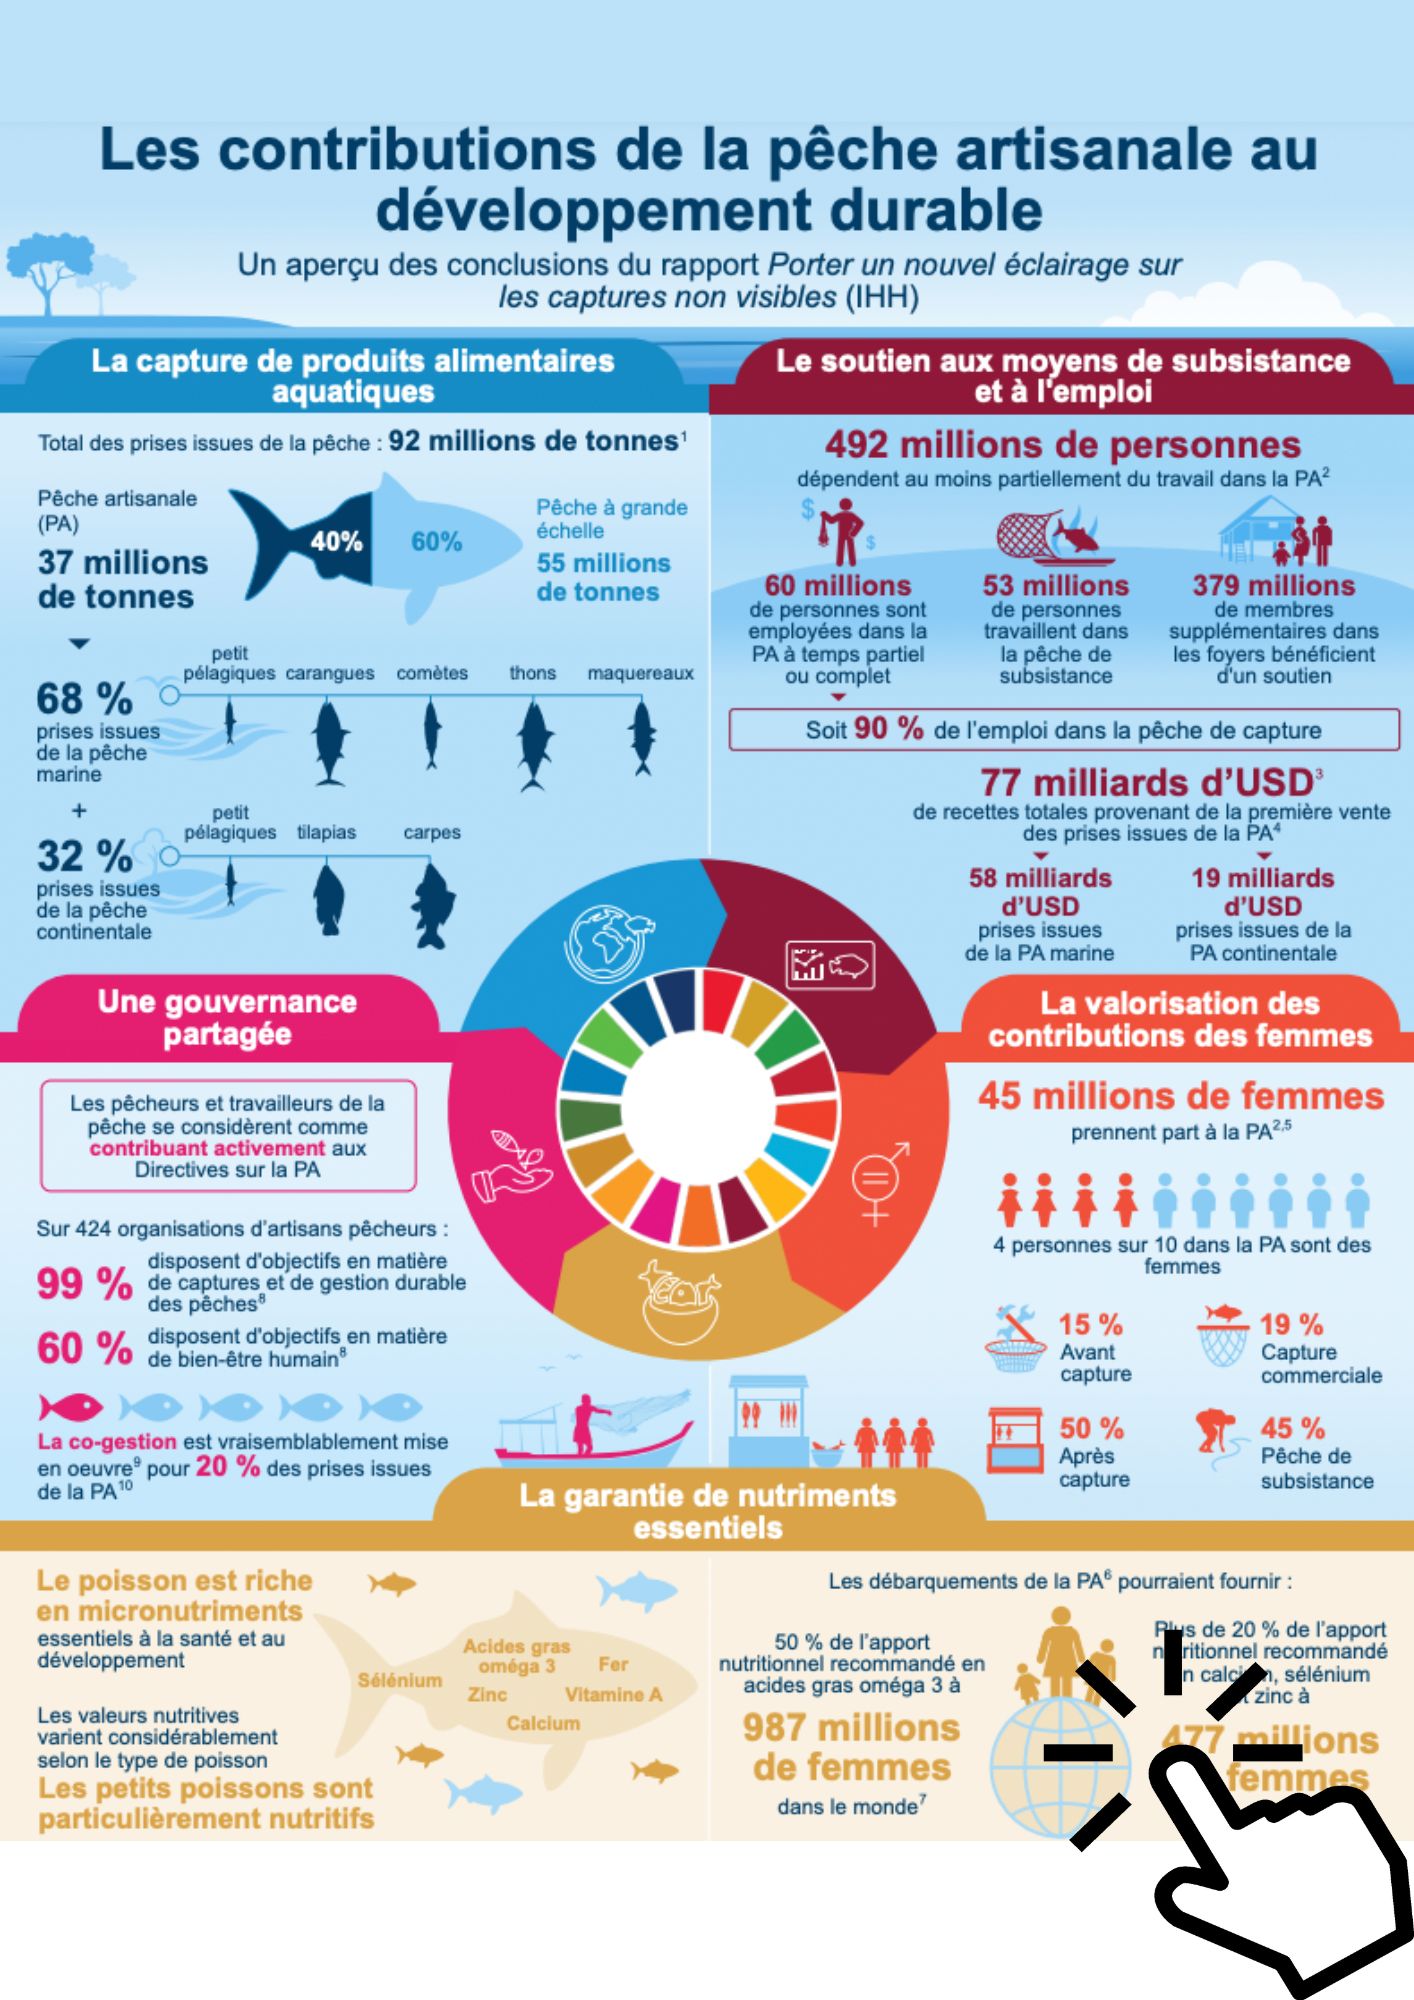 IHH infographic on the contributions of small-scale fisheries to sustainable development